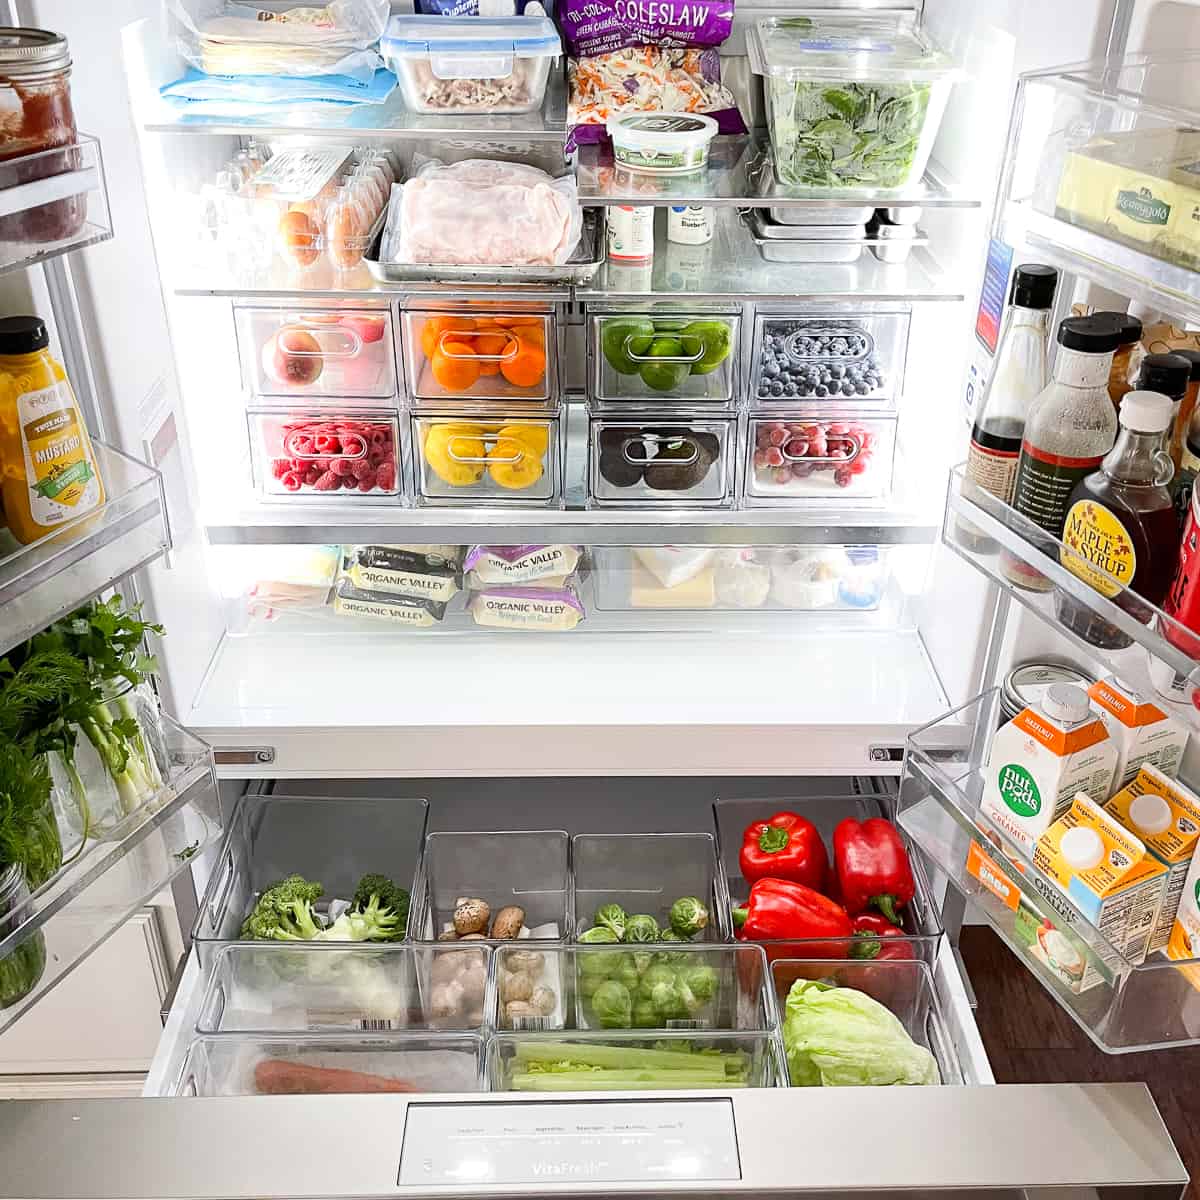 https://www.tasteslovely.com/wp-content/uploads/2022/01/refrigerator-organization-containers.jpg